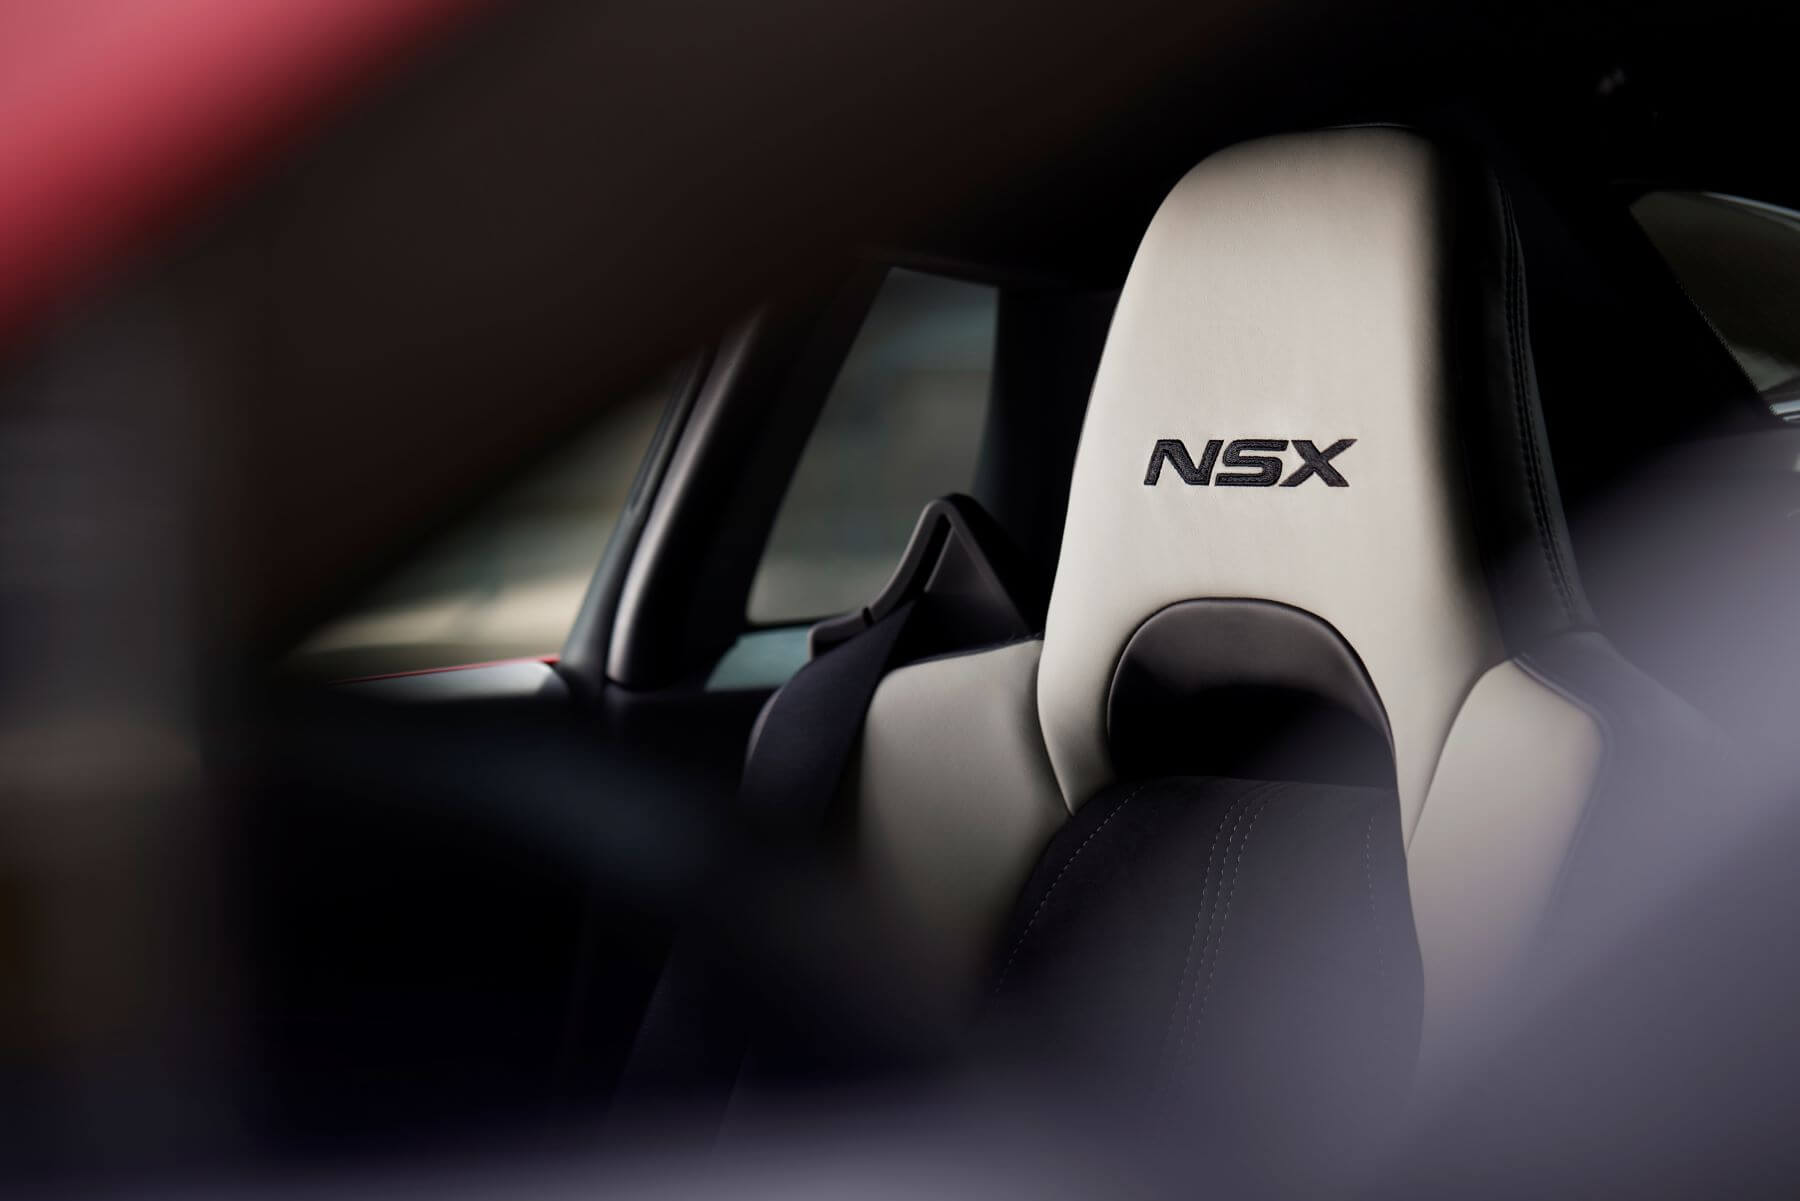 NSX-branded seating in the cabin of a 2022 Acura NSX Type S performance sports car model